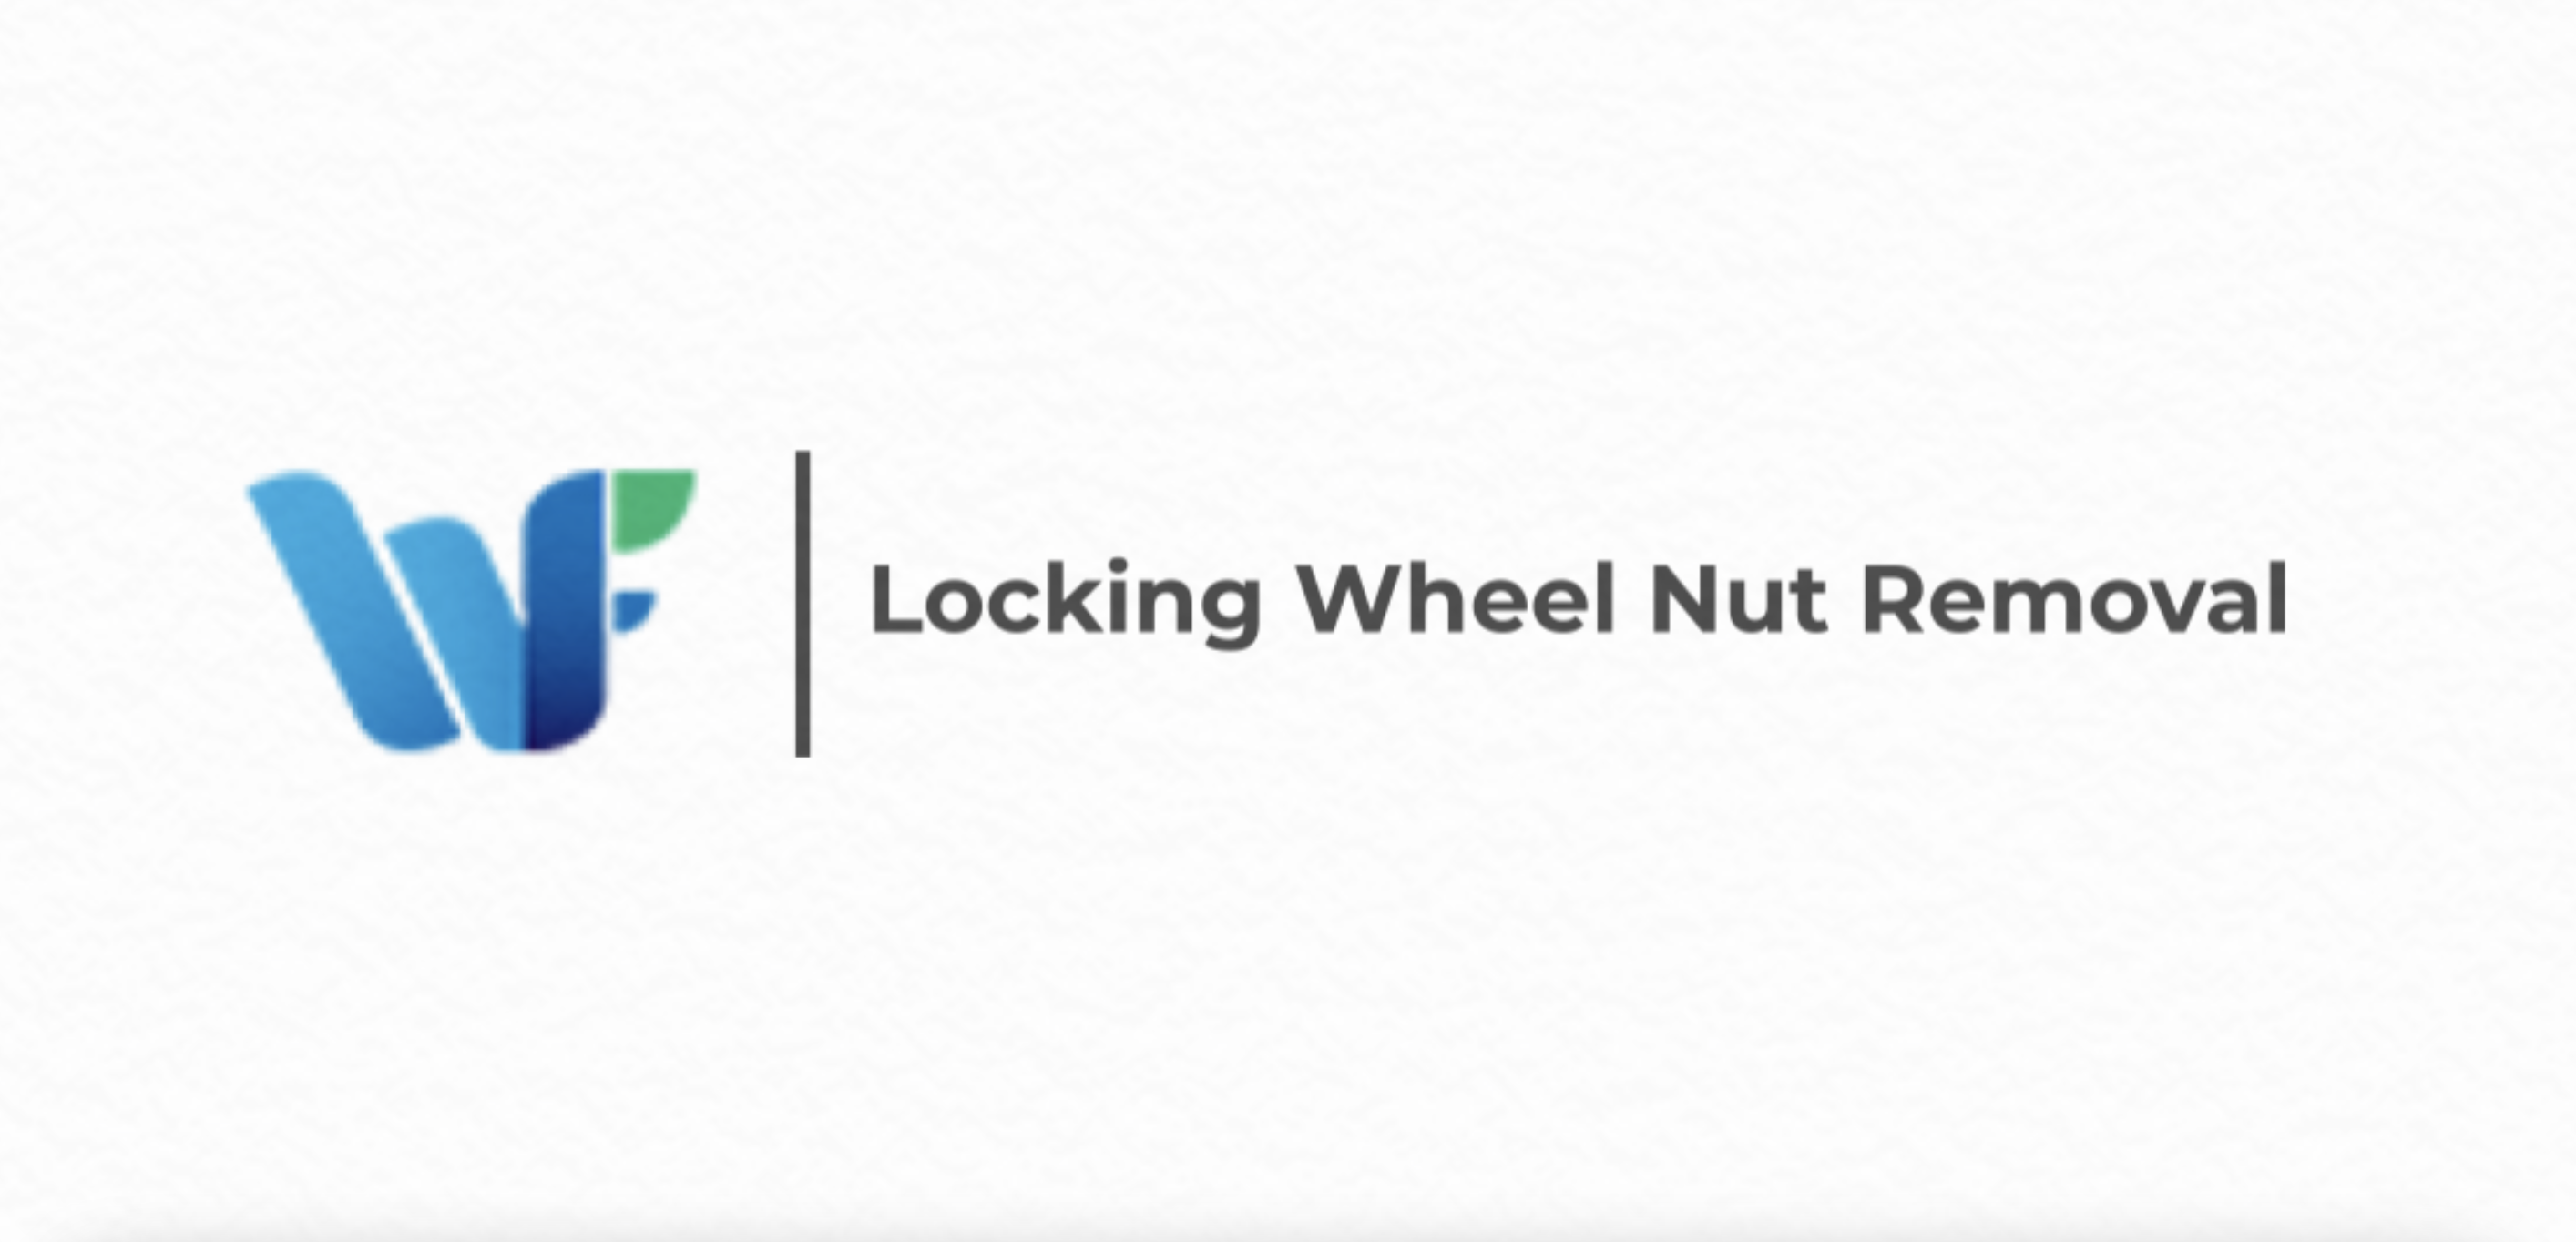 Locking Wheel Nut Removal review